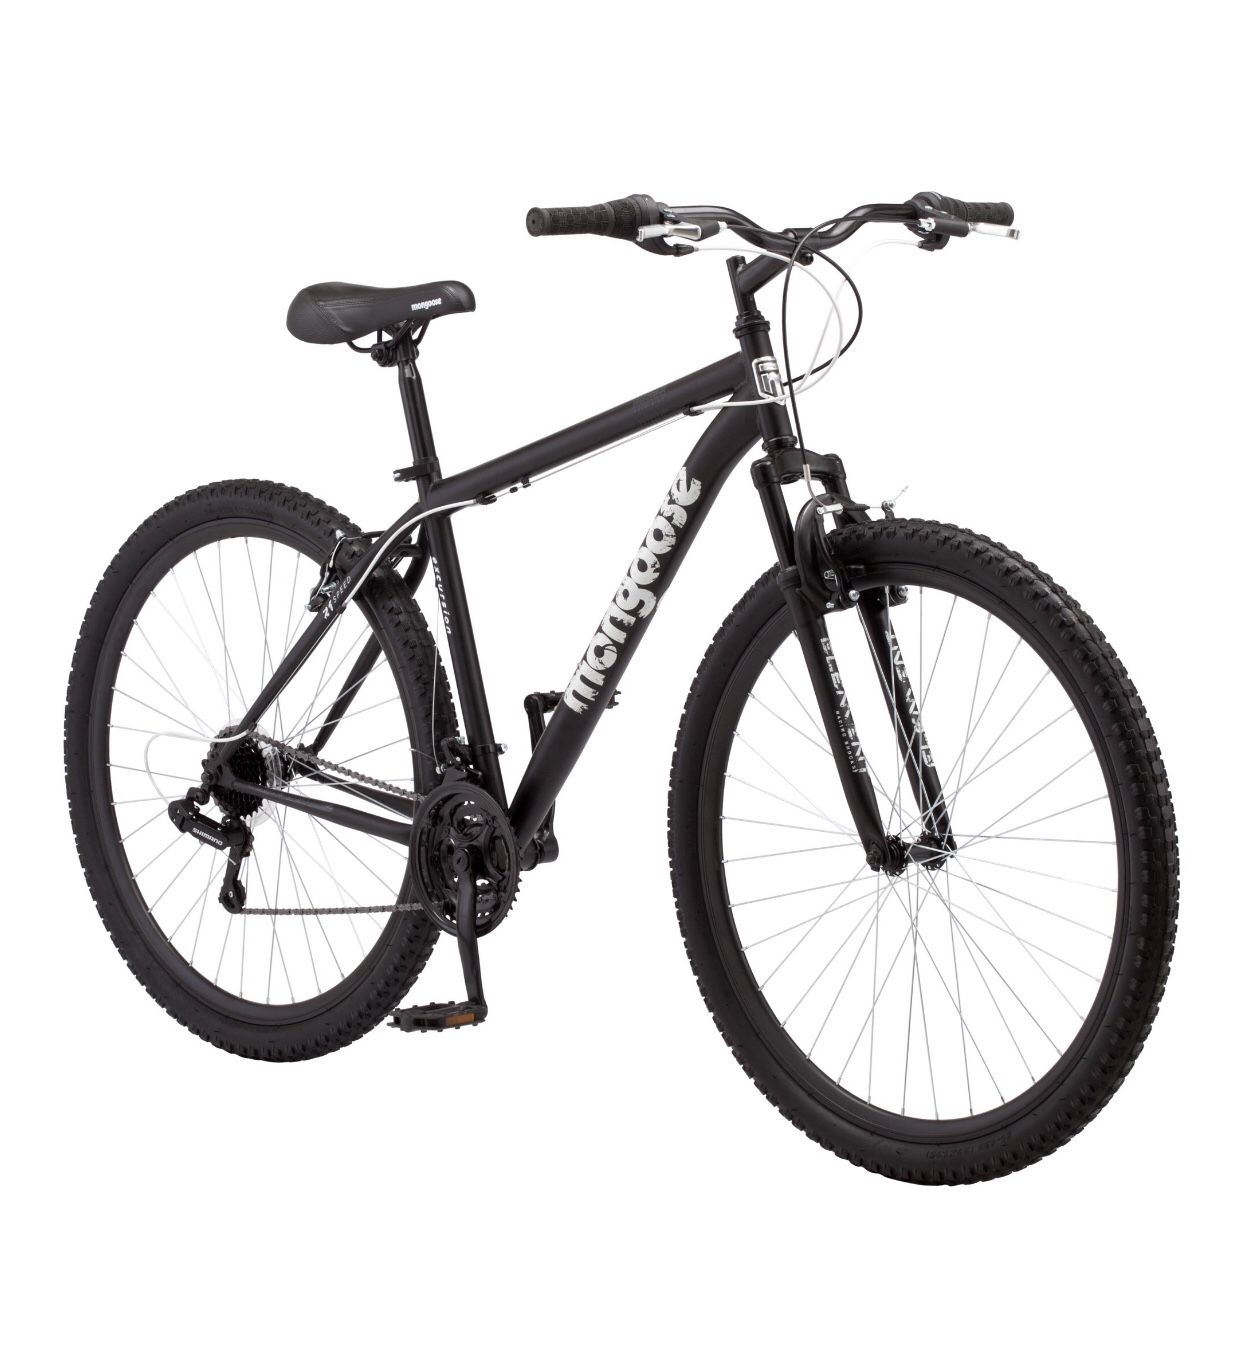 Fully Assembled NEW Mongoose Excursion Mountain Bike, 21-speed, 29 inch wheels, suspension fork, linear pull brakes, Black, mens sizes